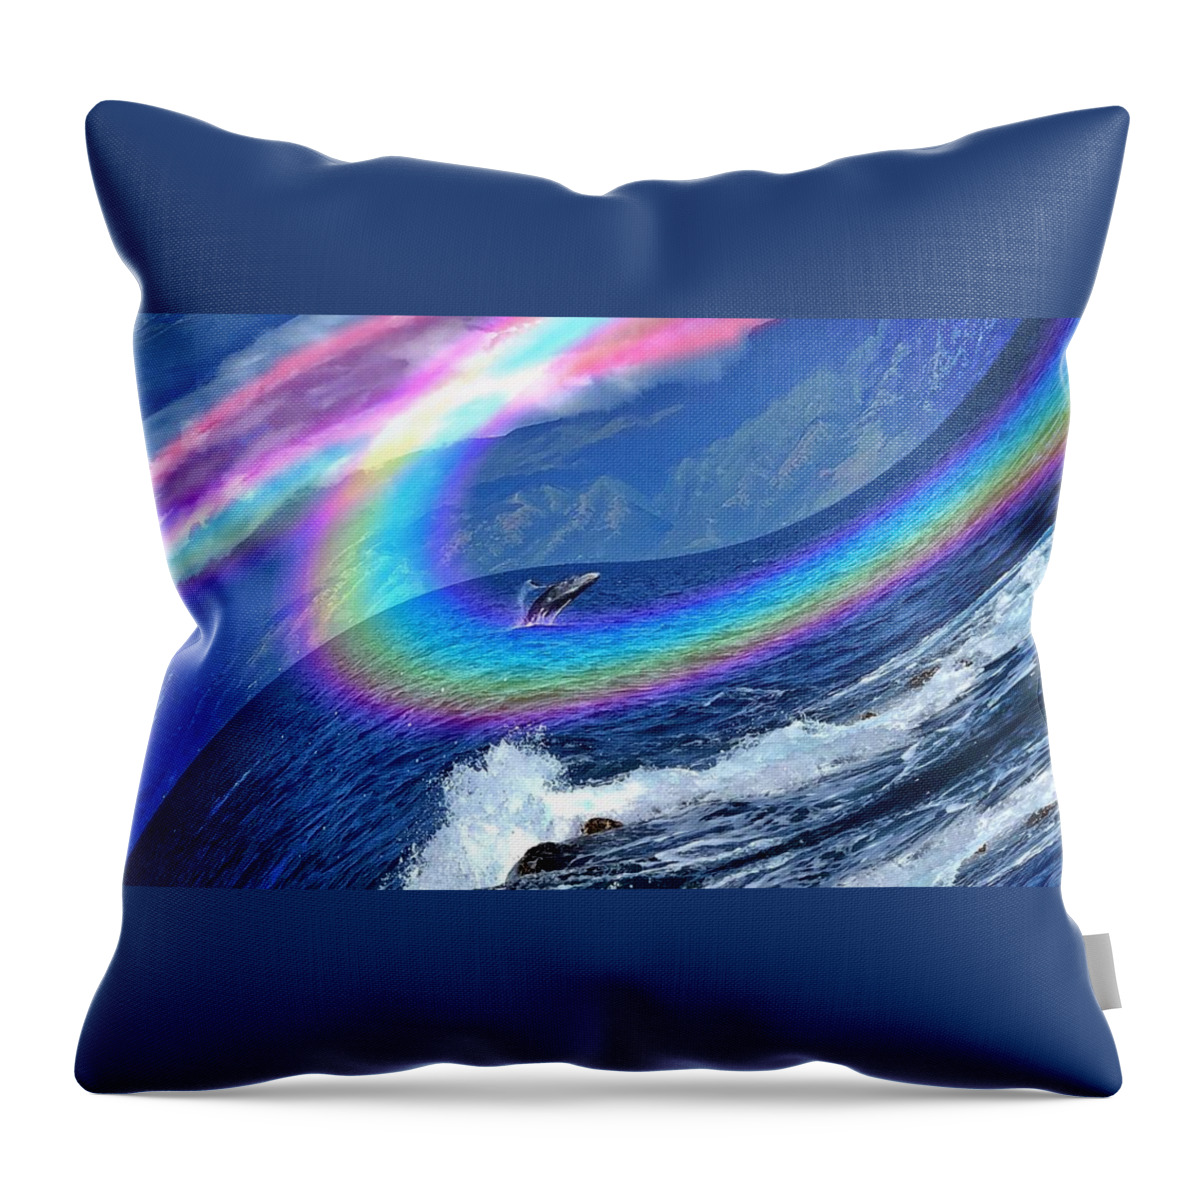 Whale Throw Pillow featuring the digital art Whale Waterfall With Extra Watery Water by Bill King